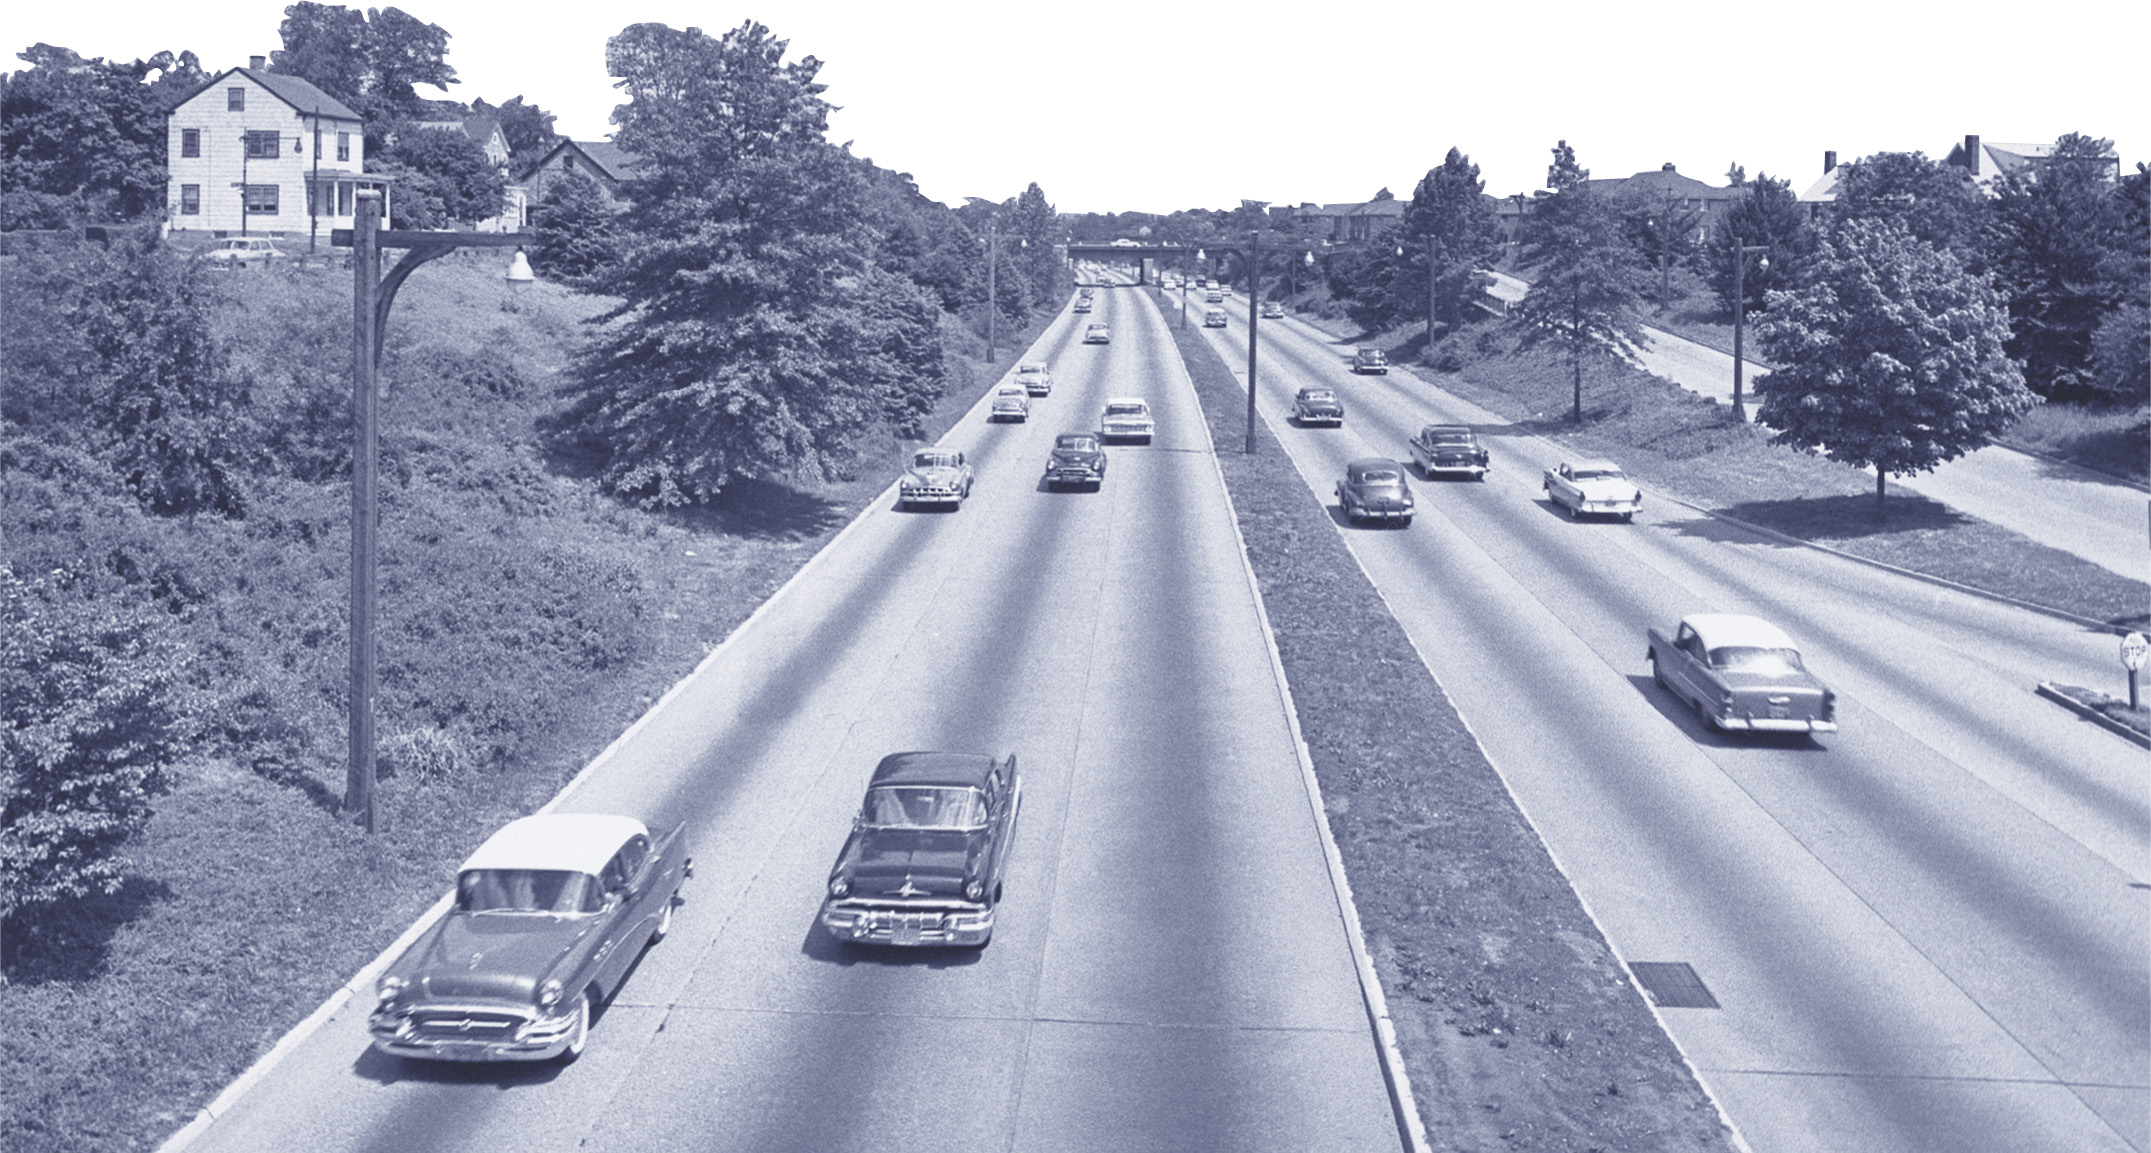 Photo: cars on a highway